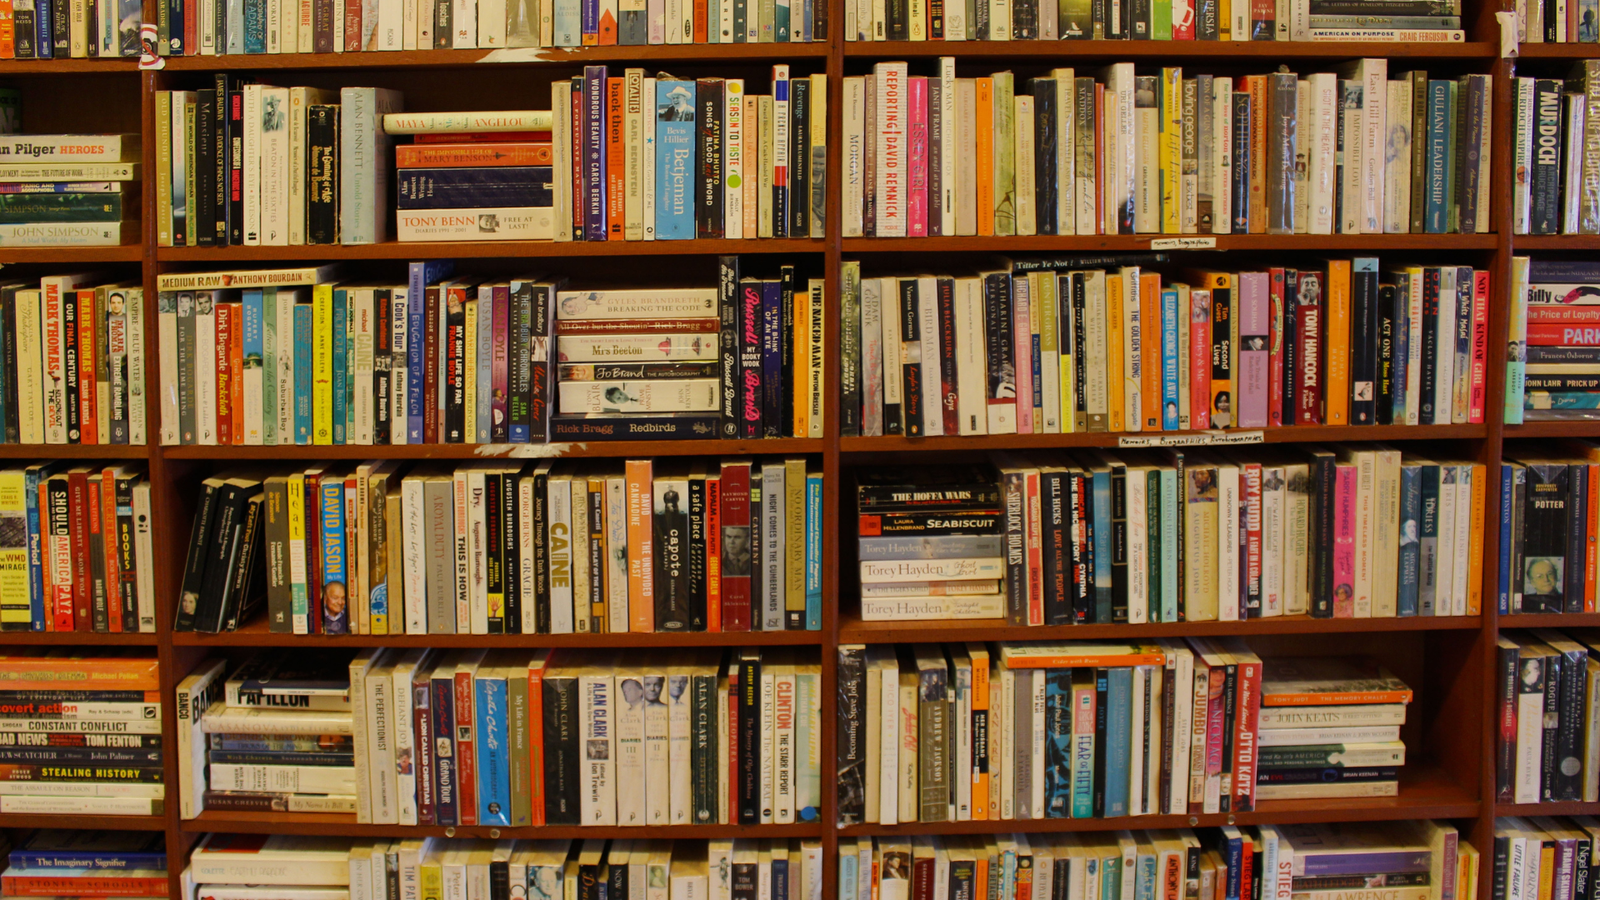 The Ultimate Financial Reading List: The Top 5 Must-Read Books to master Money Matters